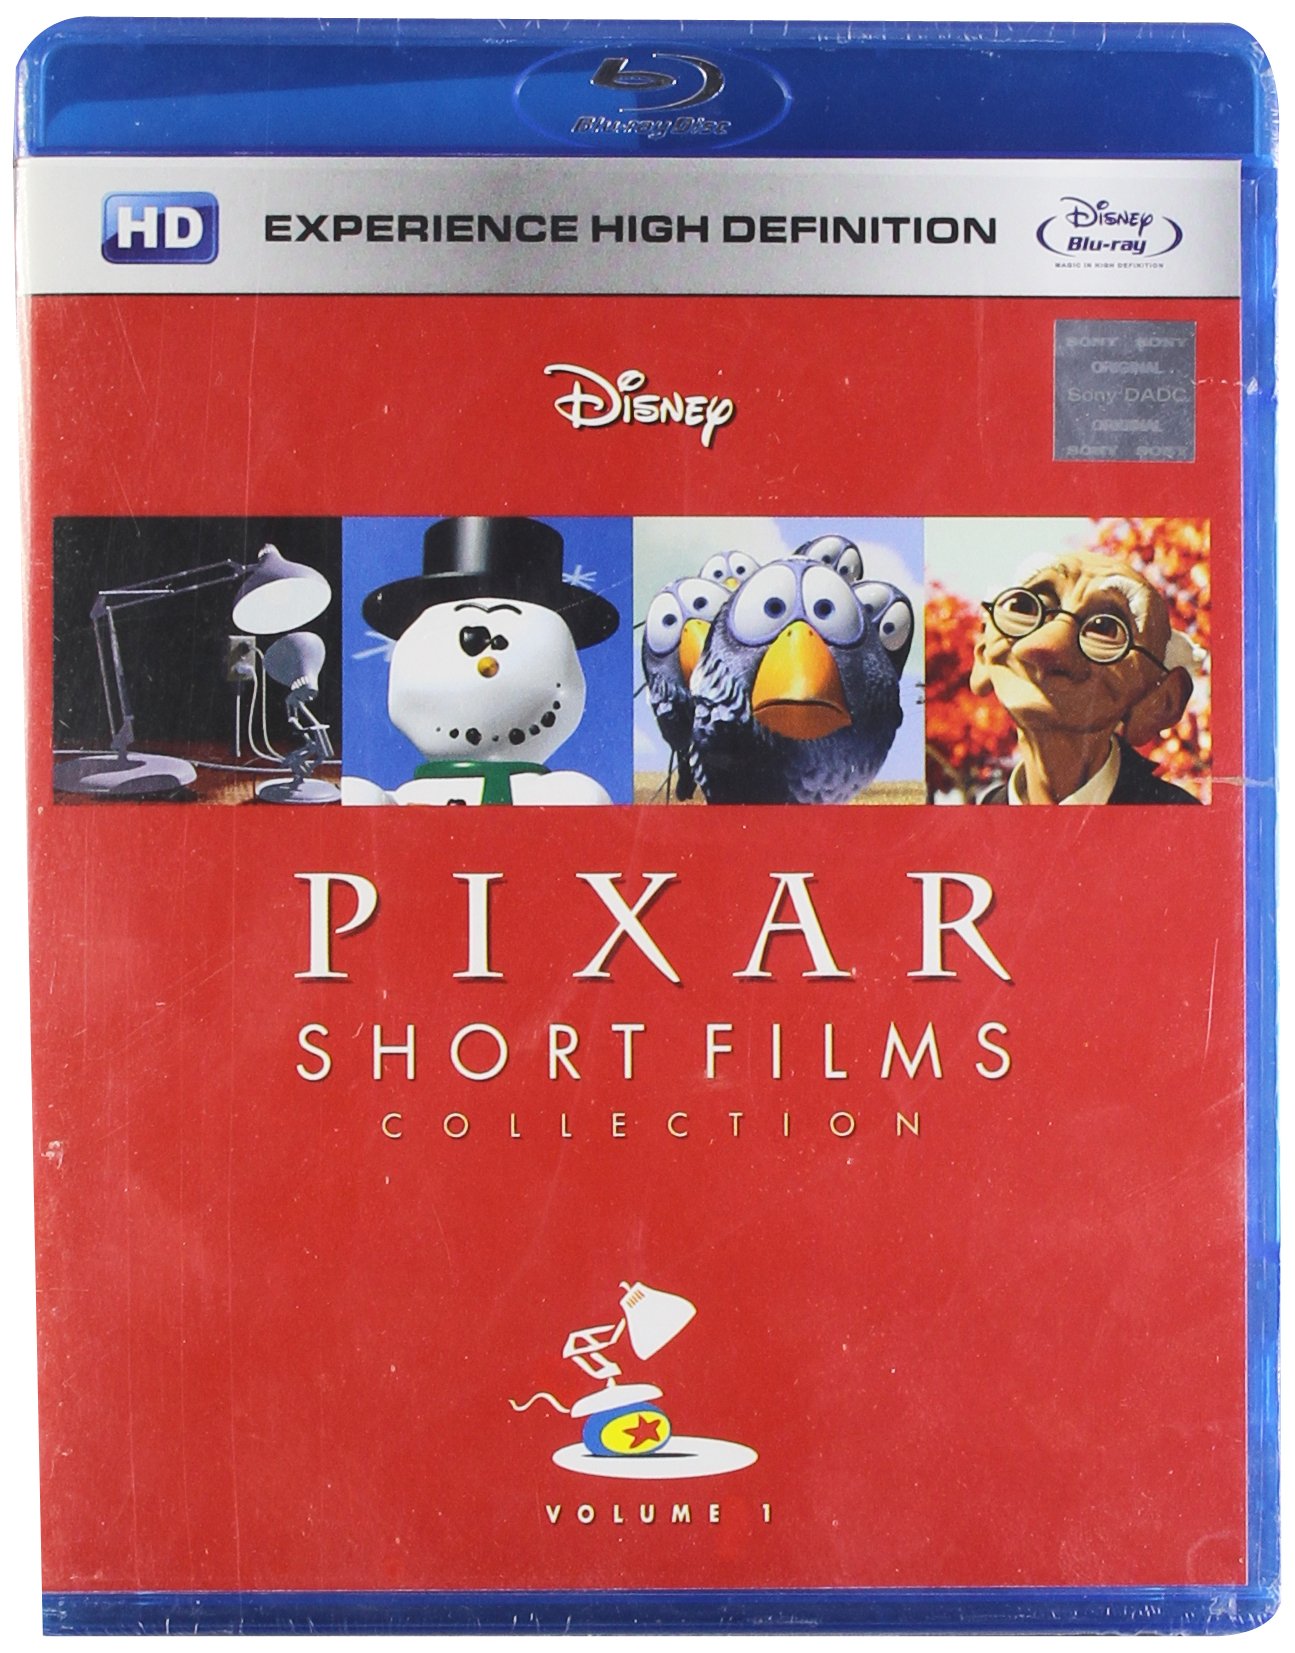 pixar-shorts-films-collection-vol-1-movie-purchase-or-watch-online